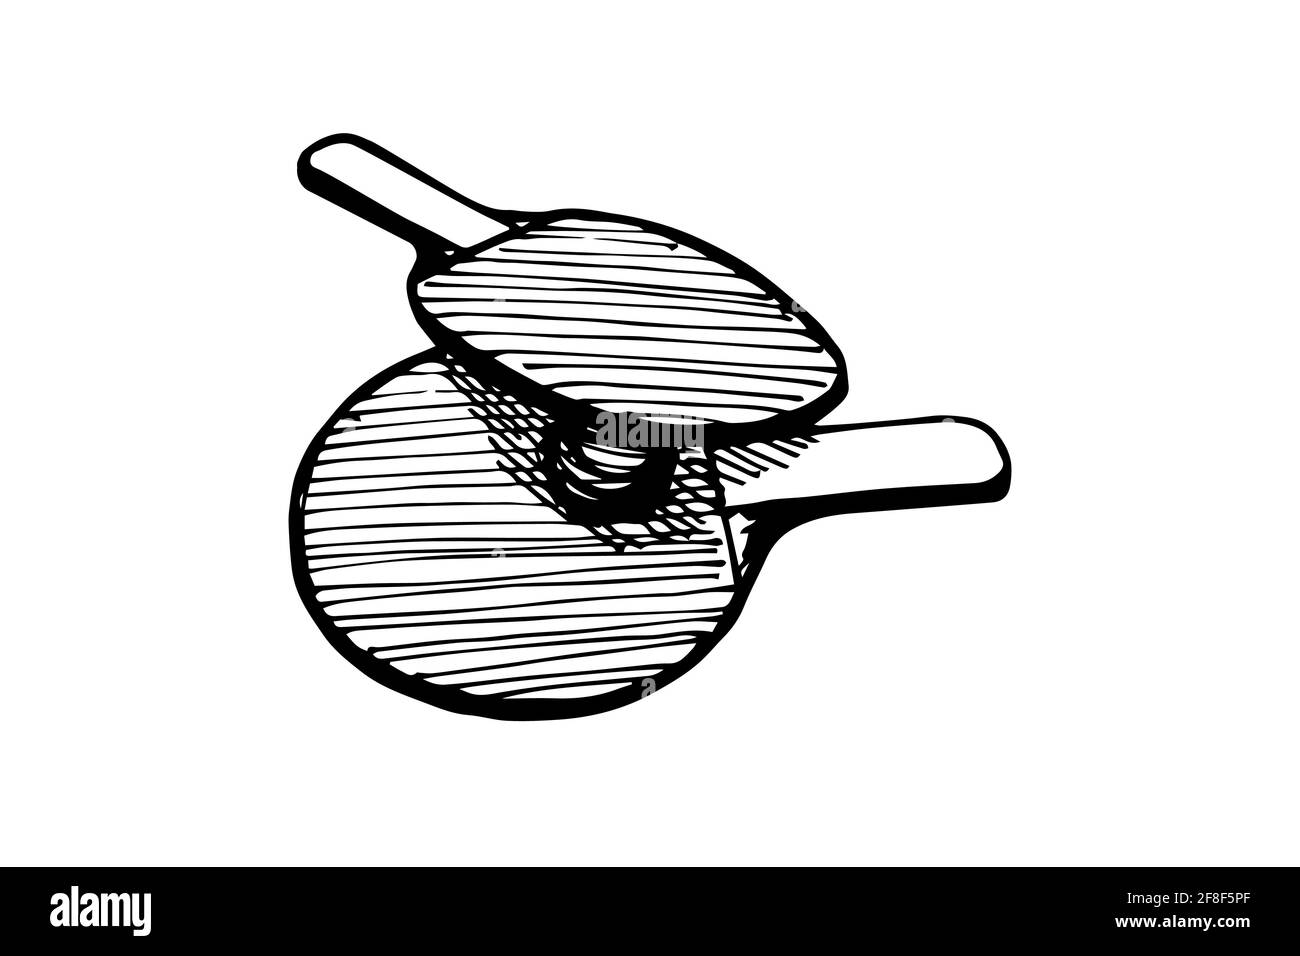 Ping-pong rackets and ball hand drawn outline sketch icon. Table tennis equipment. Ping pong game paddles logo concept. Vector eps black ink doodle isolated illustration on white background Stock Vector